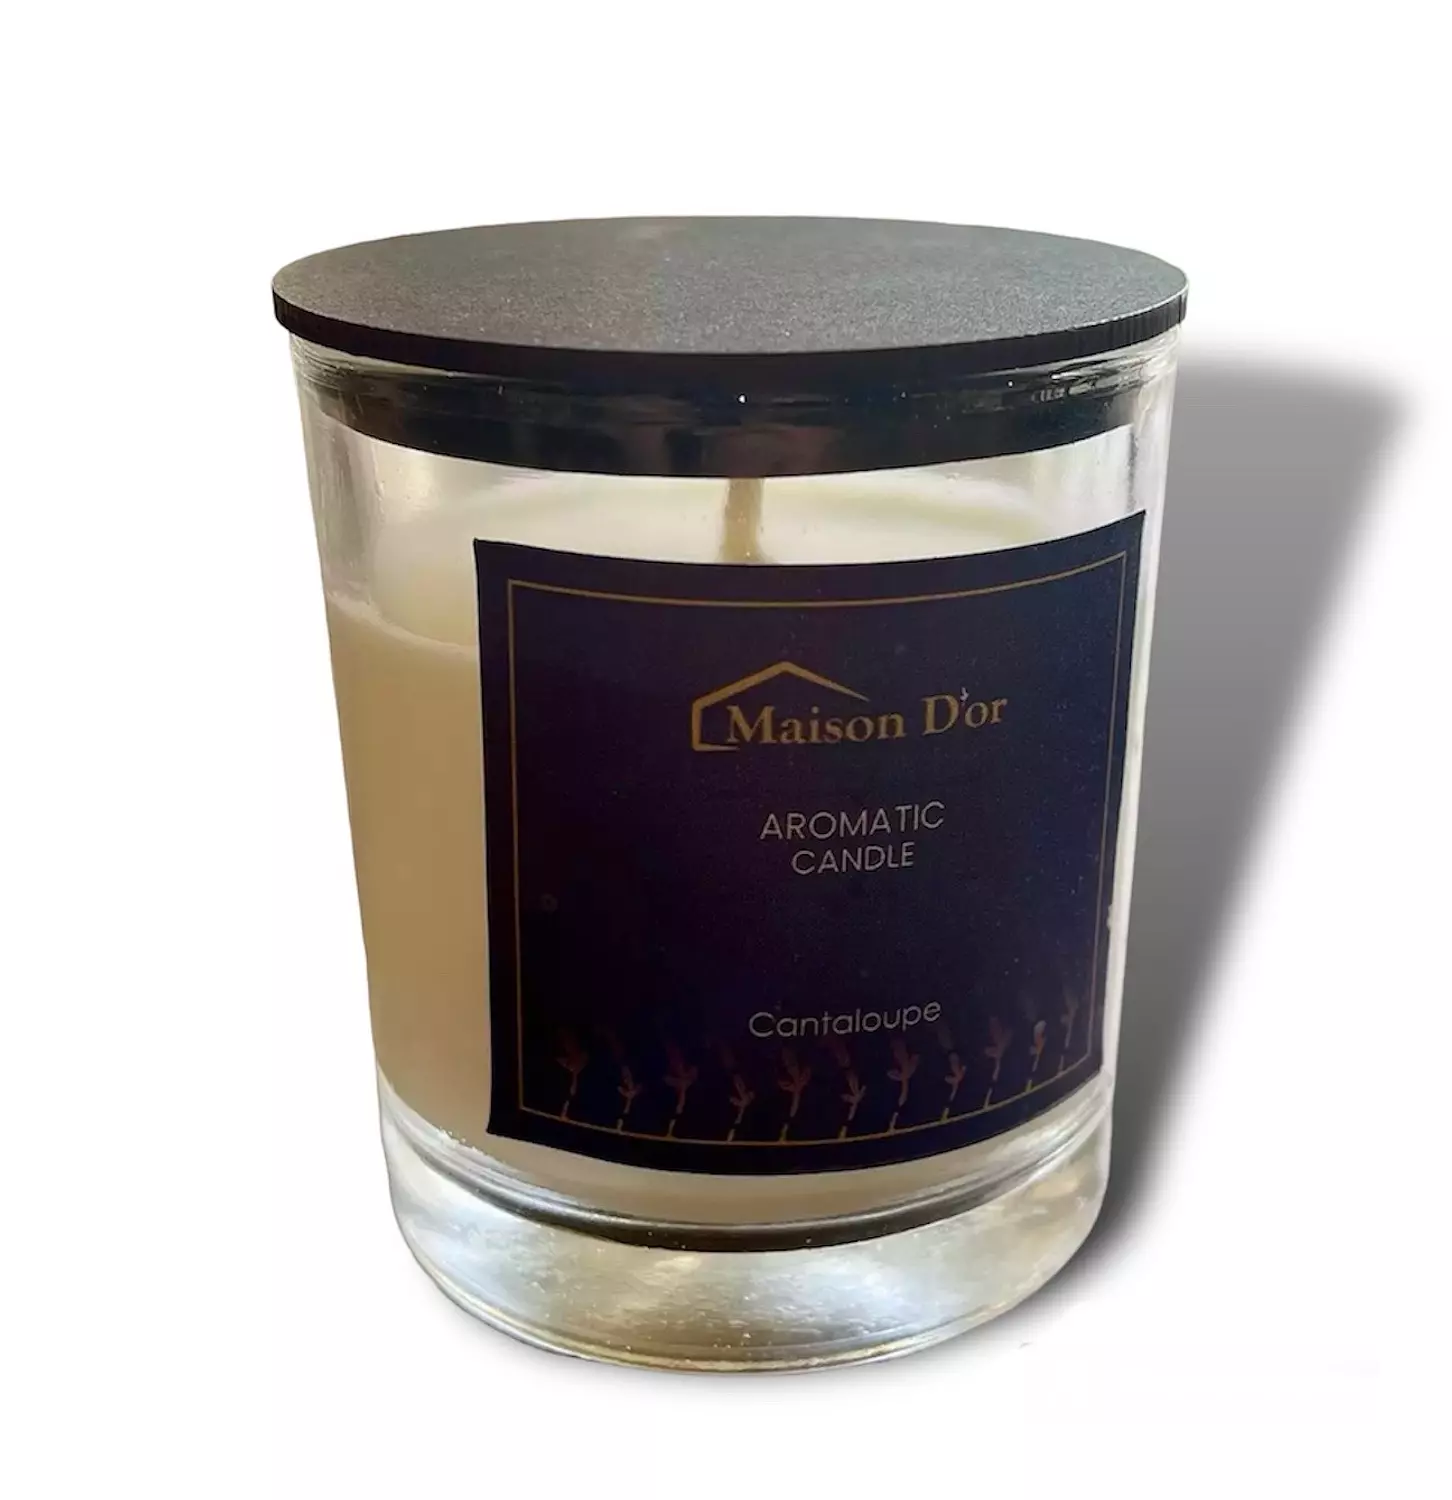 Aromatic Candle hover image